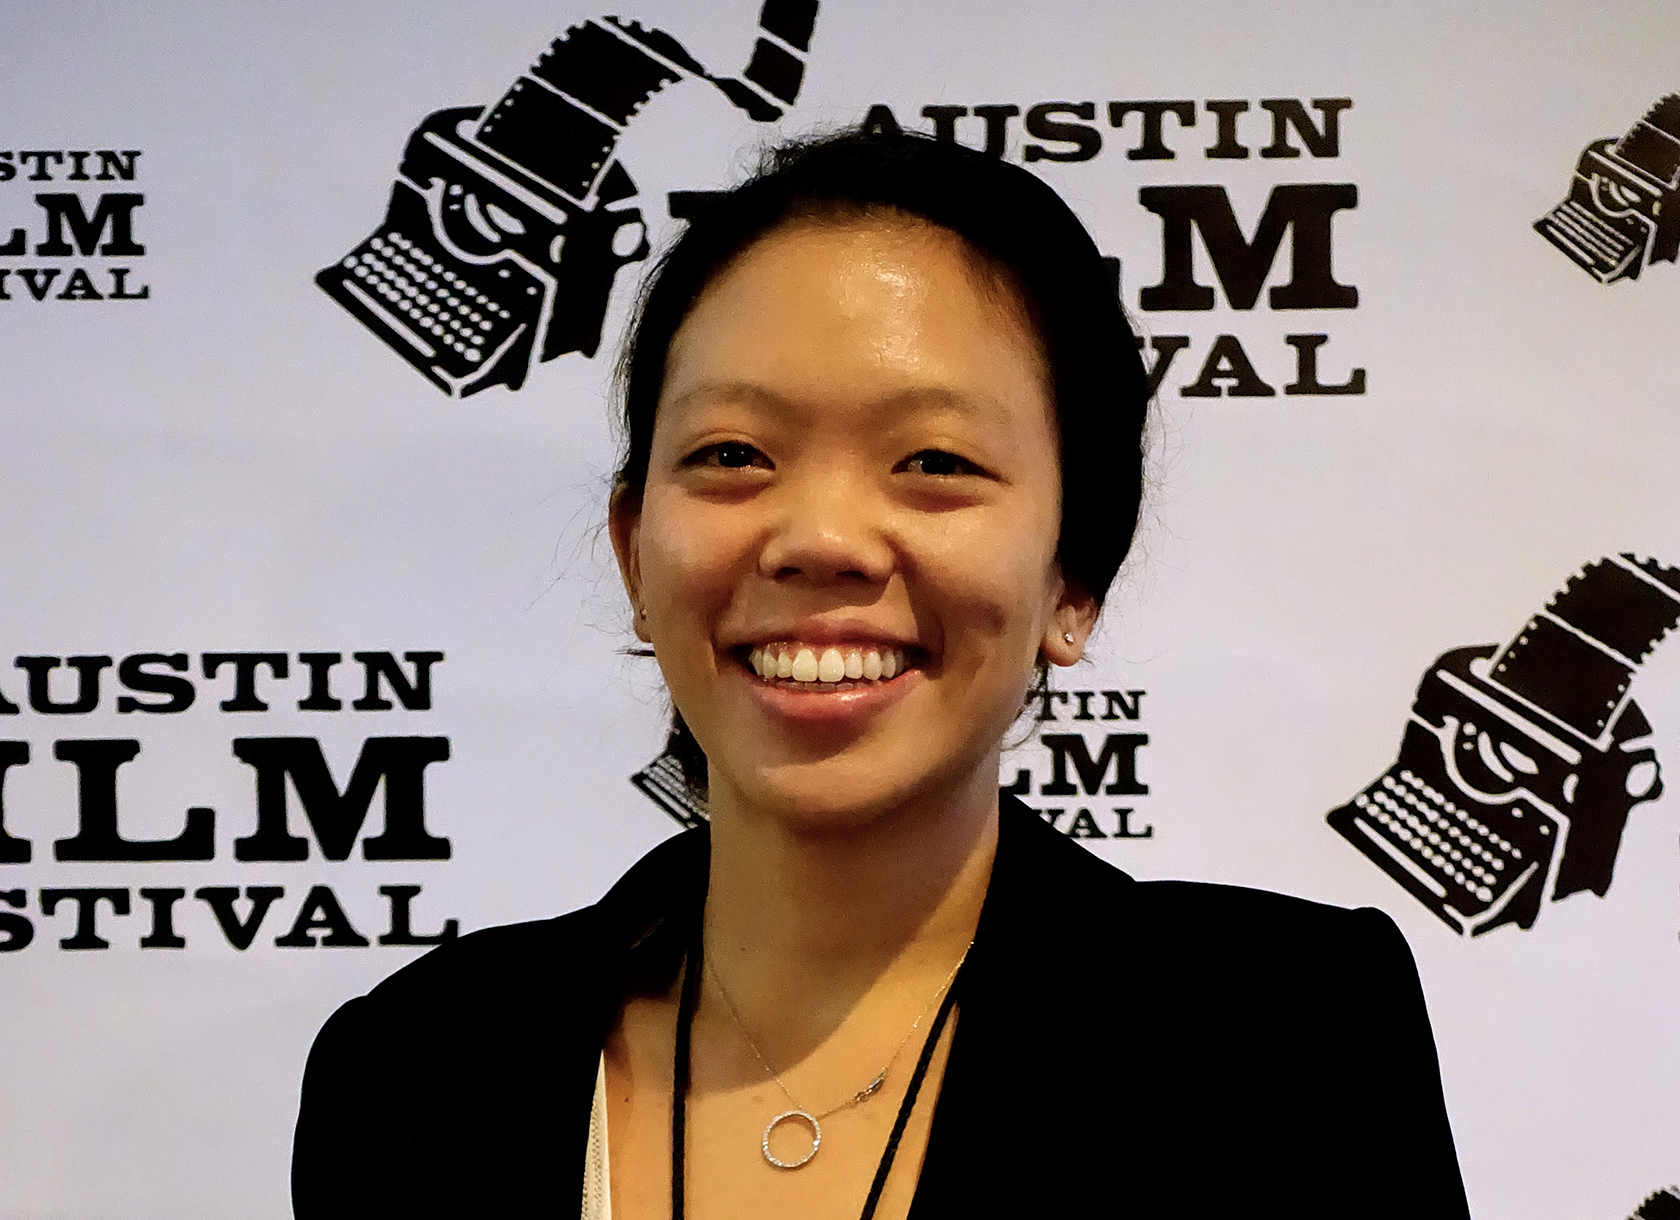 A headshot of a smiling Asian woman wearing a black blazer at a film festival. 